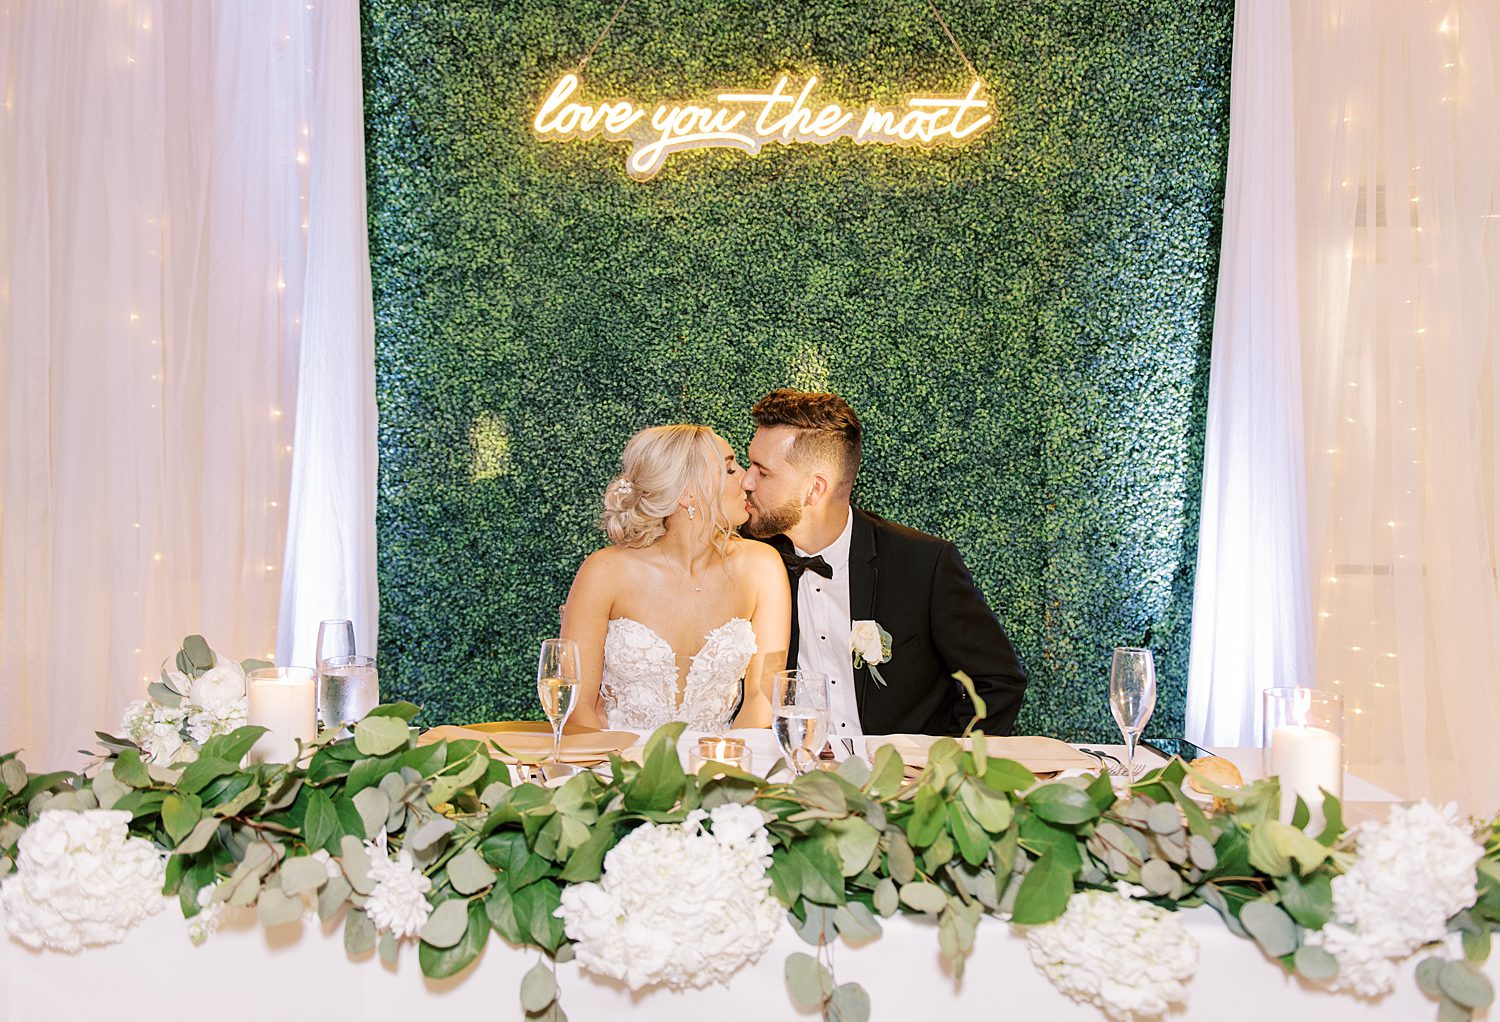 bride and groom kiss by greenery wall with neon sign